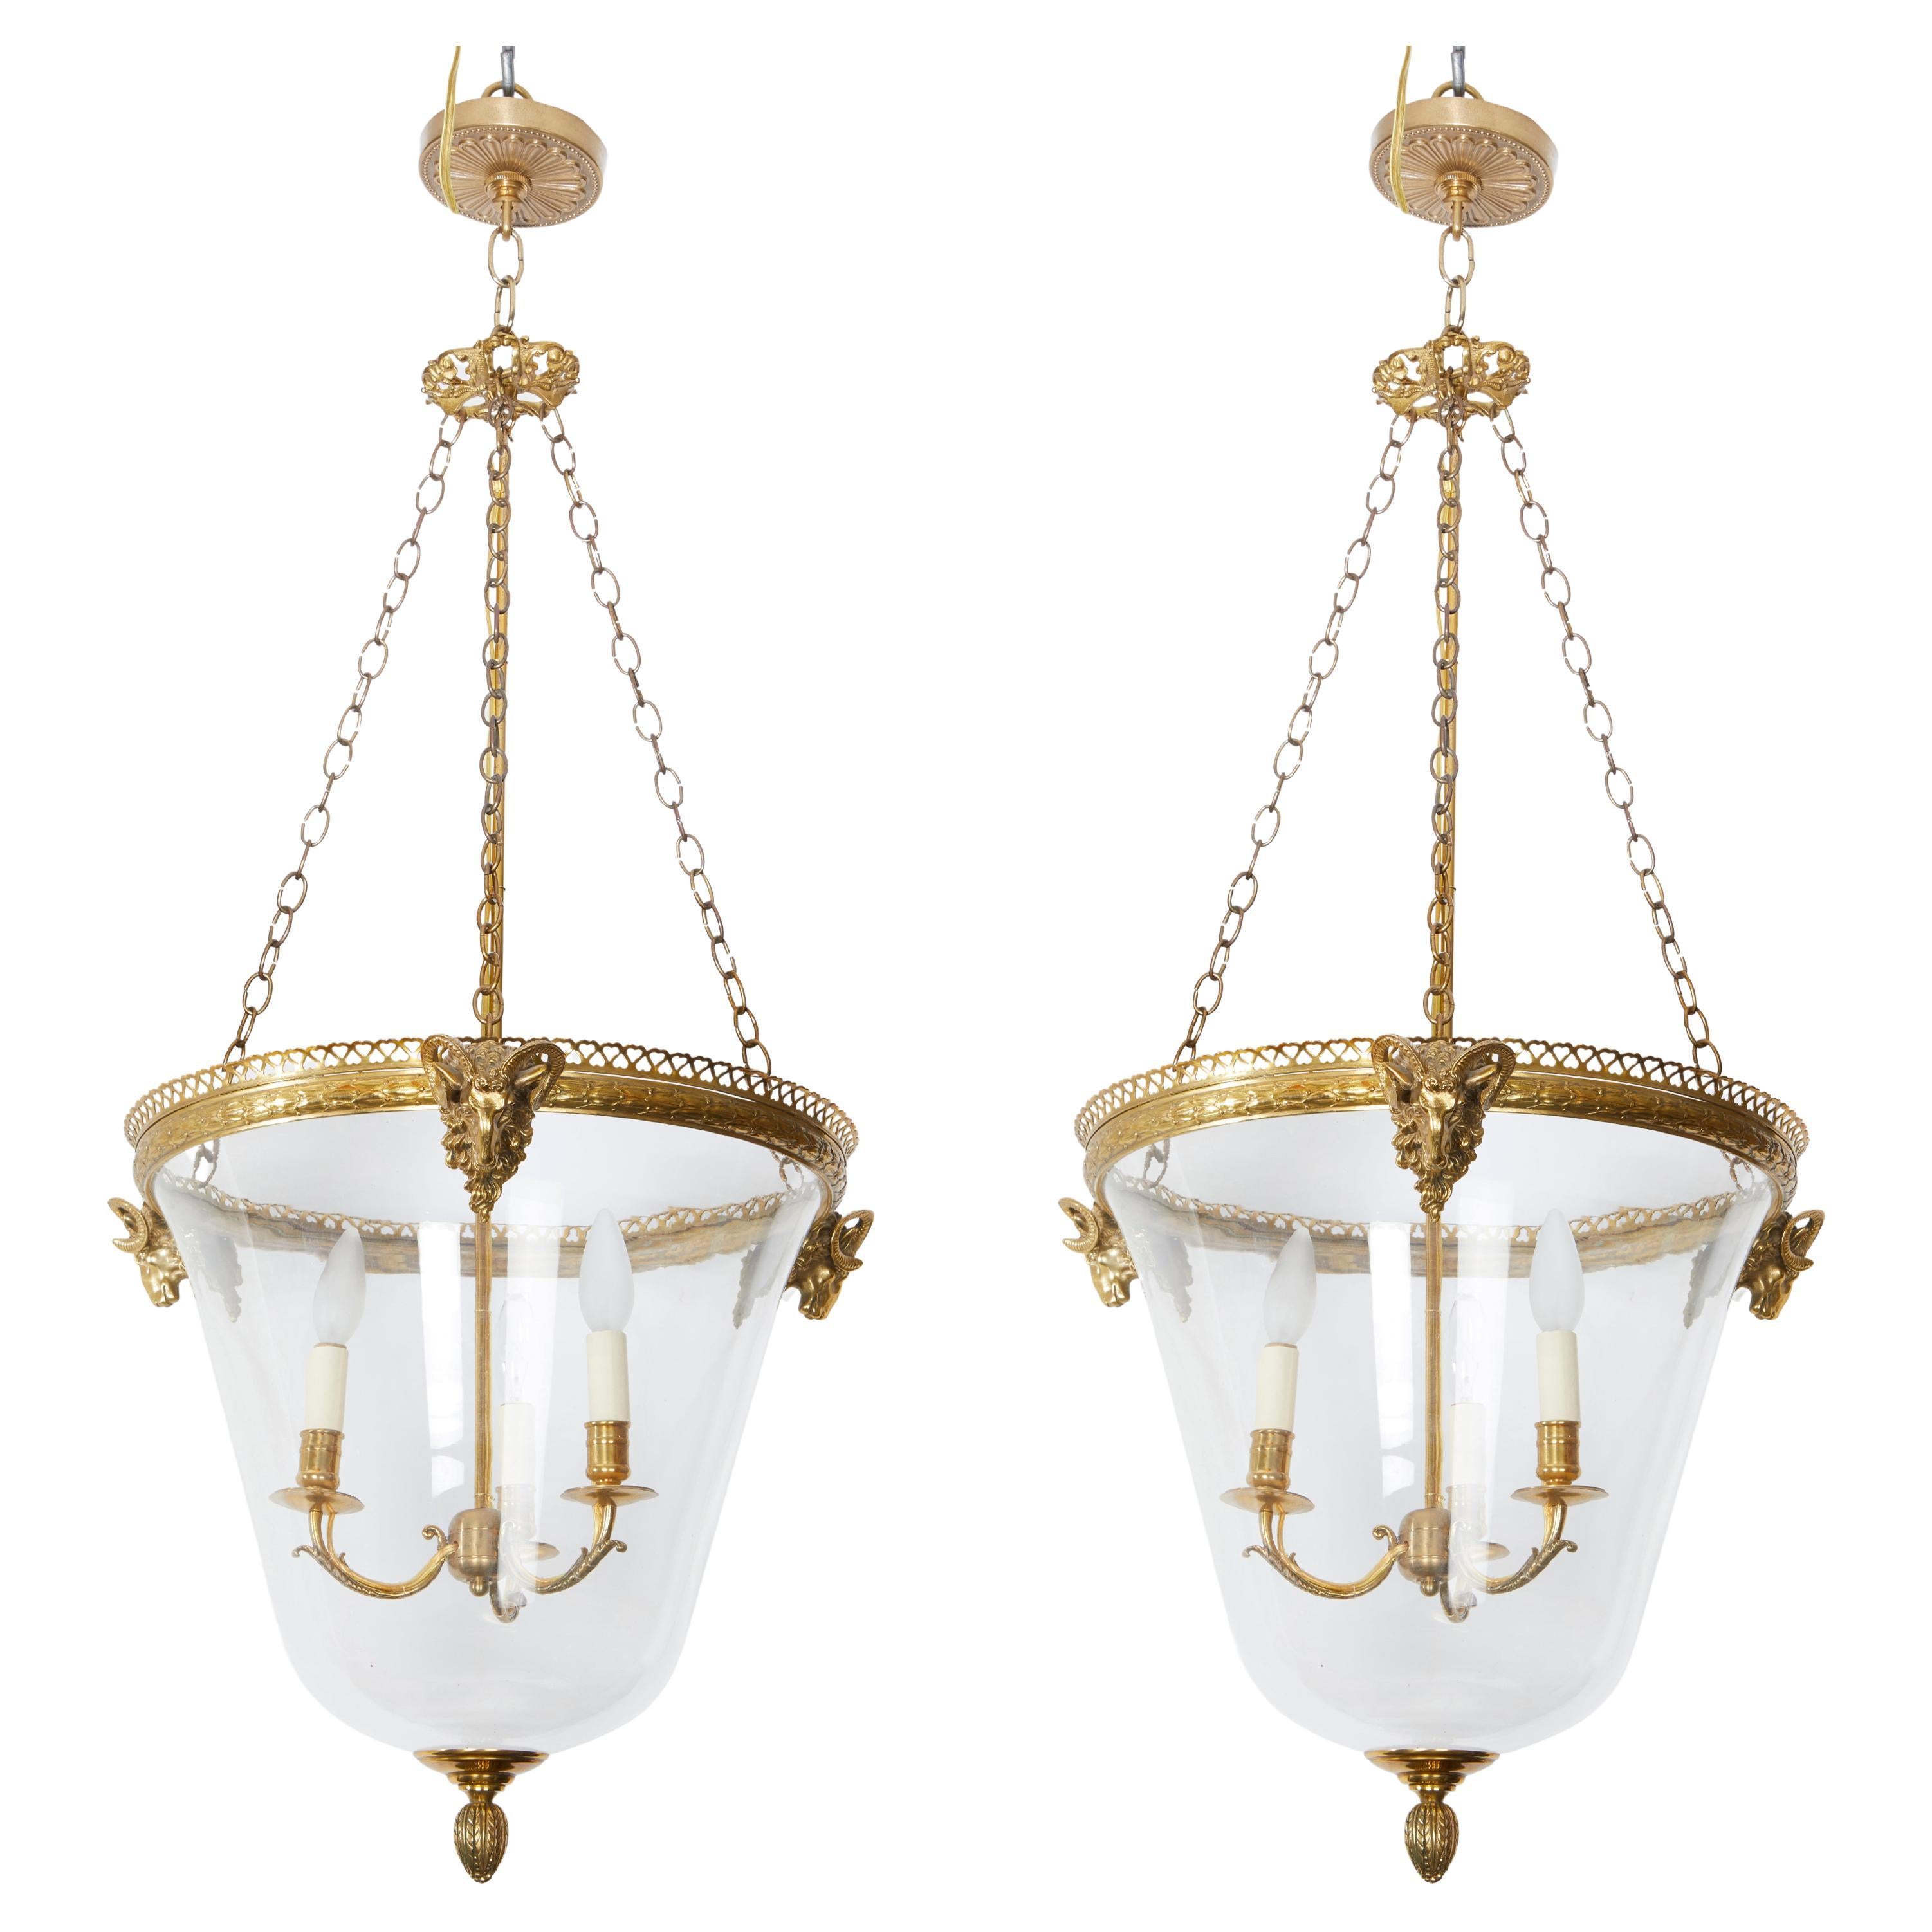 A French Louie XIV style glass lantern. The bell-shape body is suspended from 3 lengths of brass chain secured to the brass rim with pierced gallery edge. Three Ram heads mount each lantern with a three light cluster suspended from a canopy while